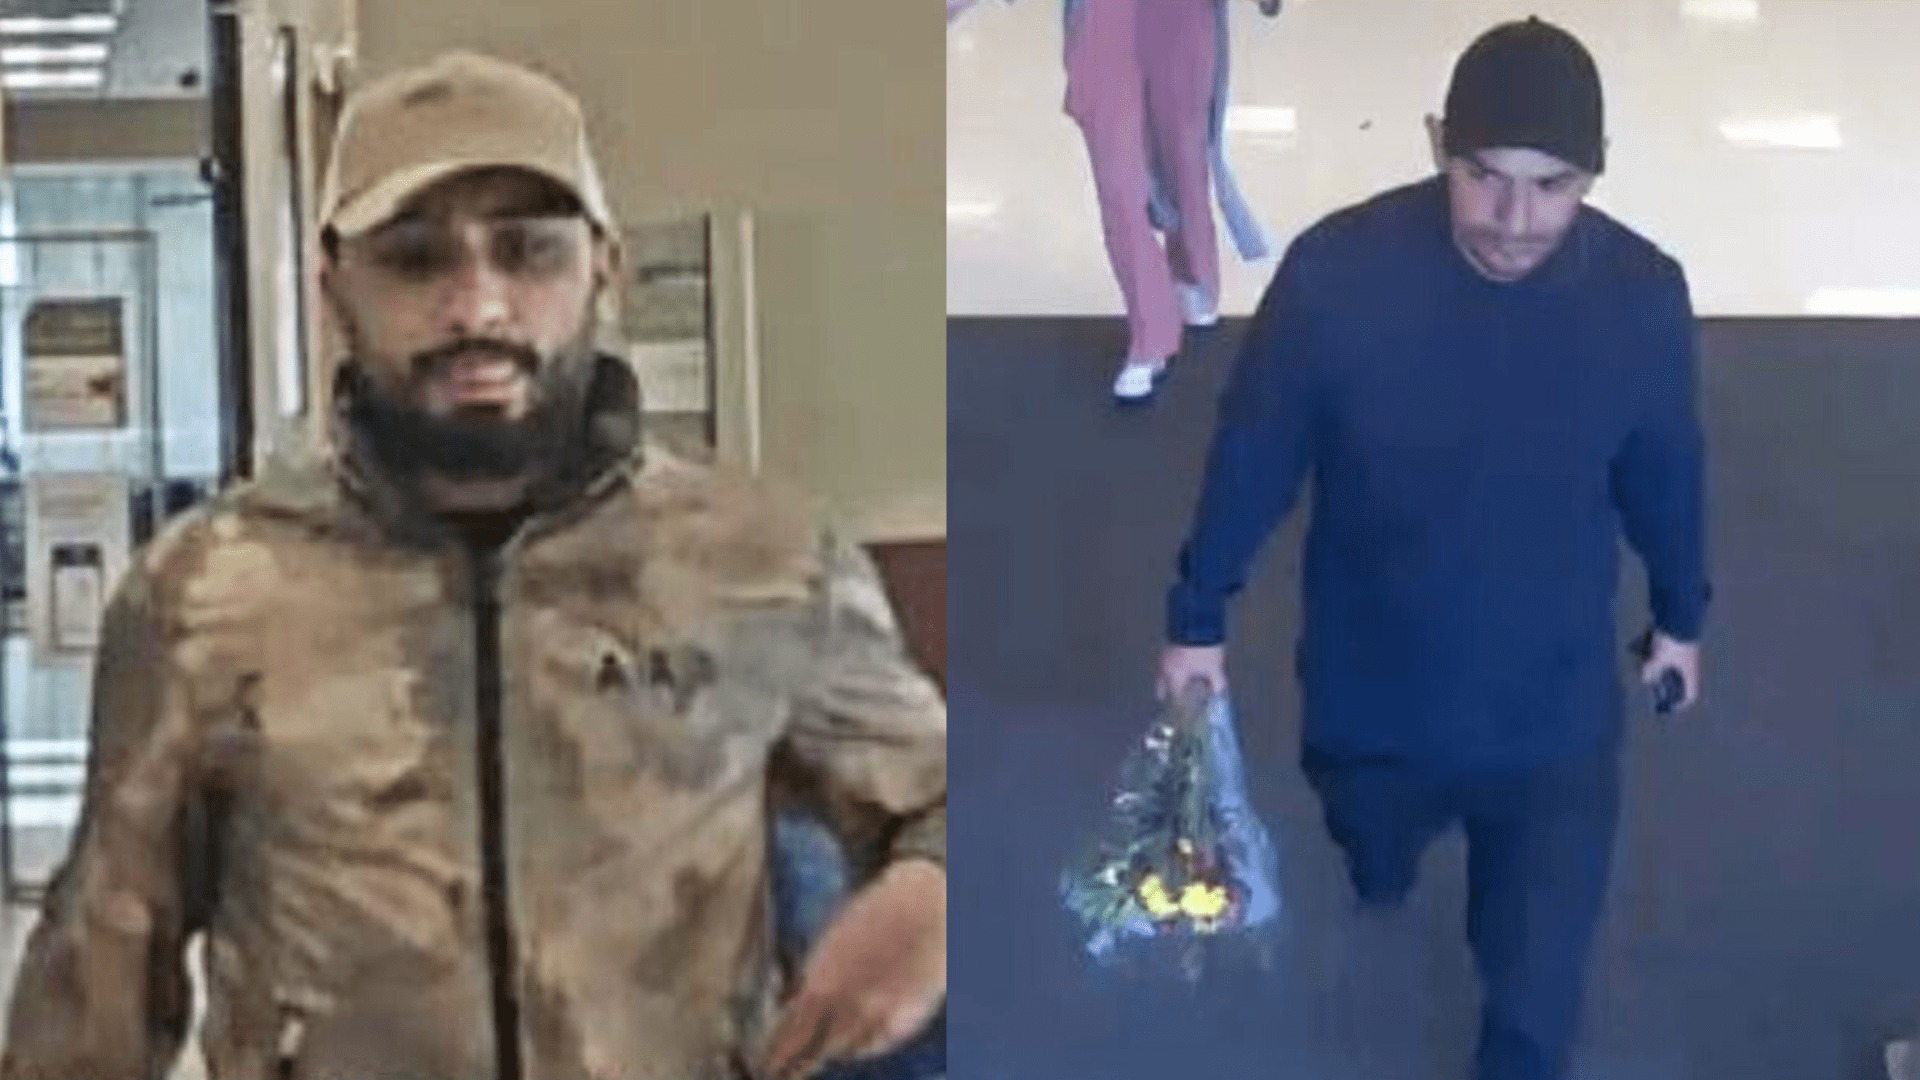 From left: Male suspect wanted for allegedly withdrawing funds from a bank using a stolen debit card taken in a distraction theft; Male suspect accused of stealing a wallet full of credit cards at Home Goods. (Irvine Police Department)